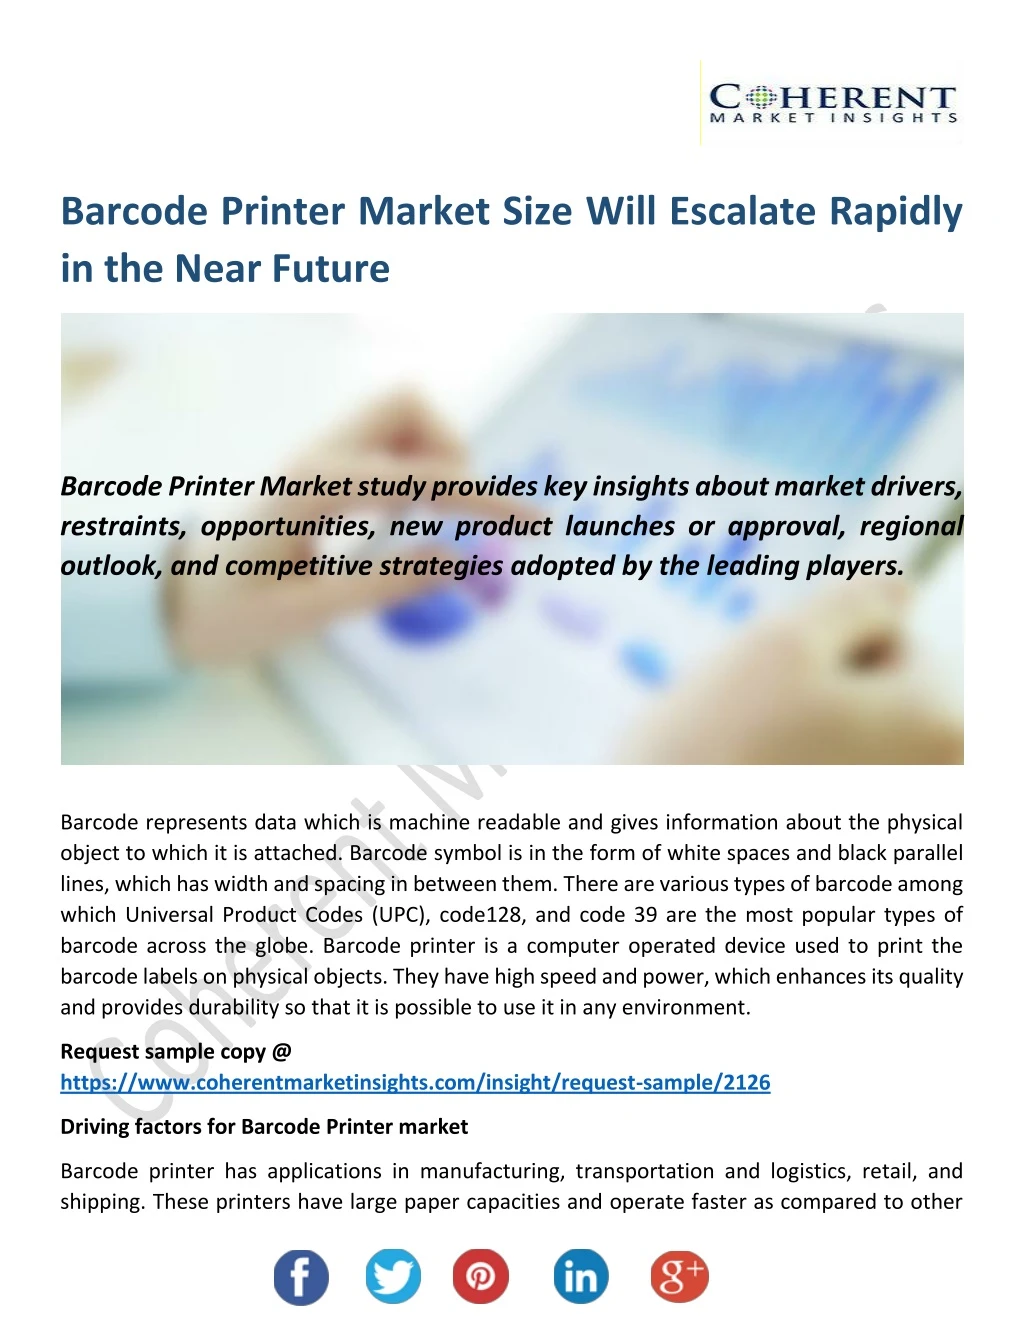 barcode printer market size will escalate rapidly